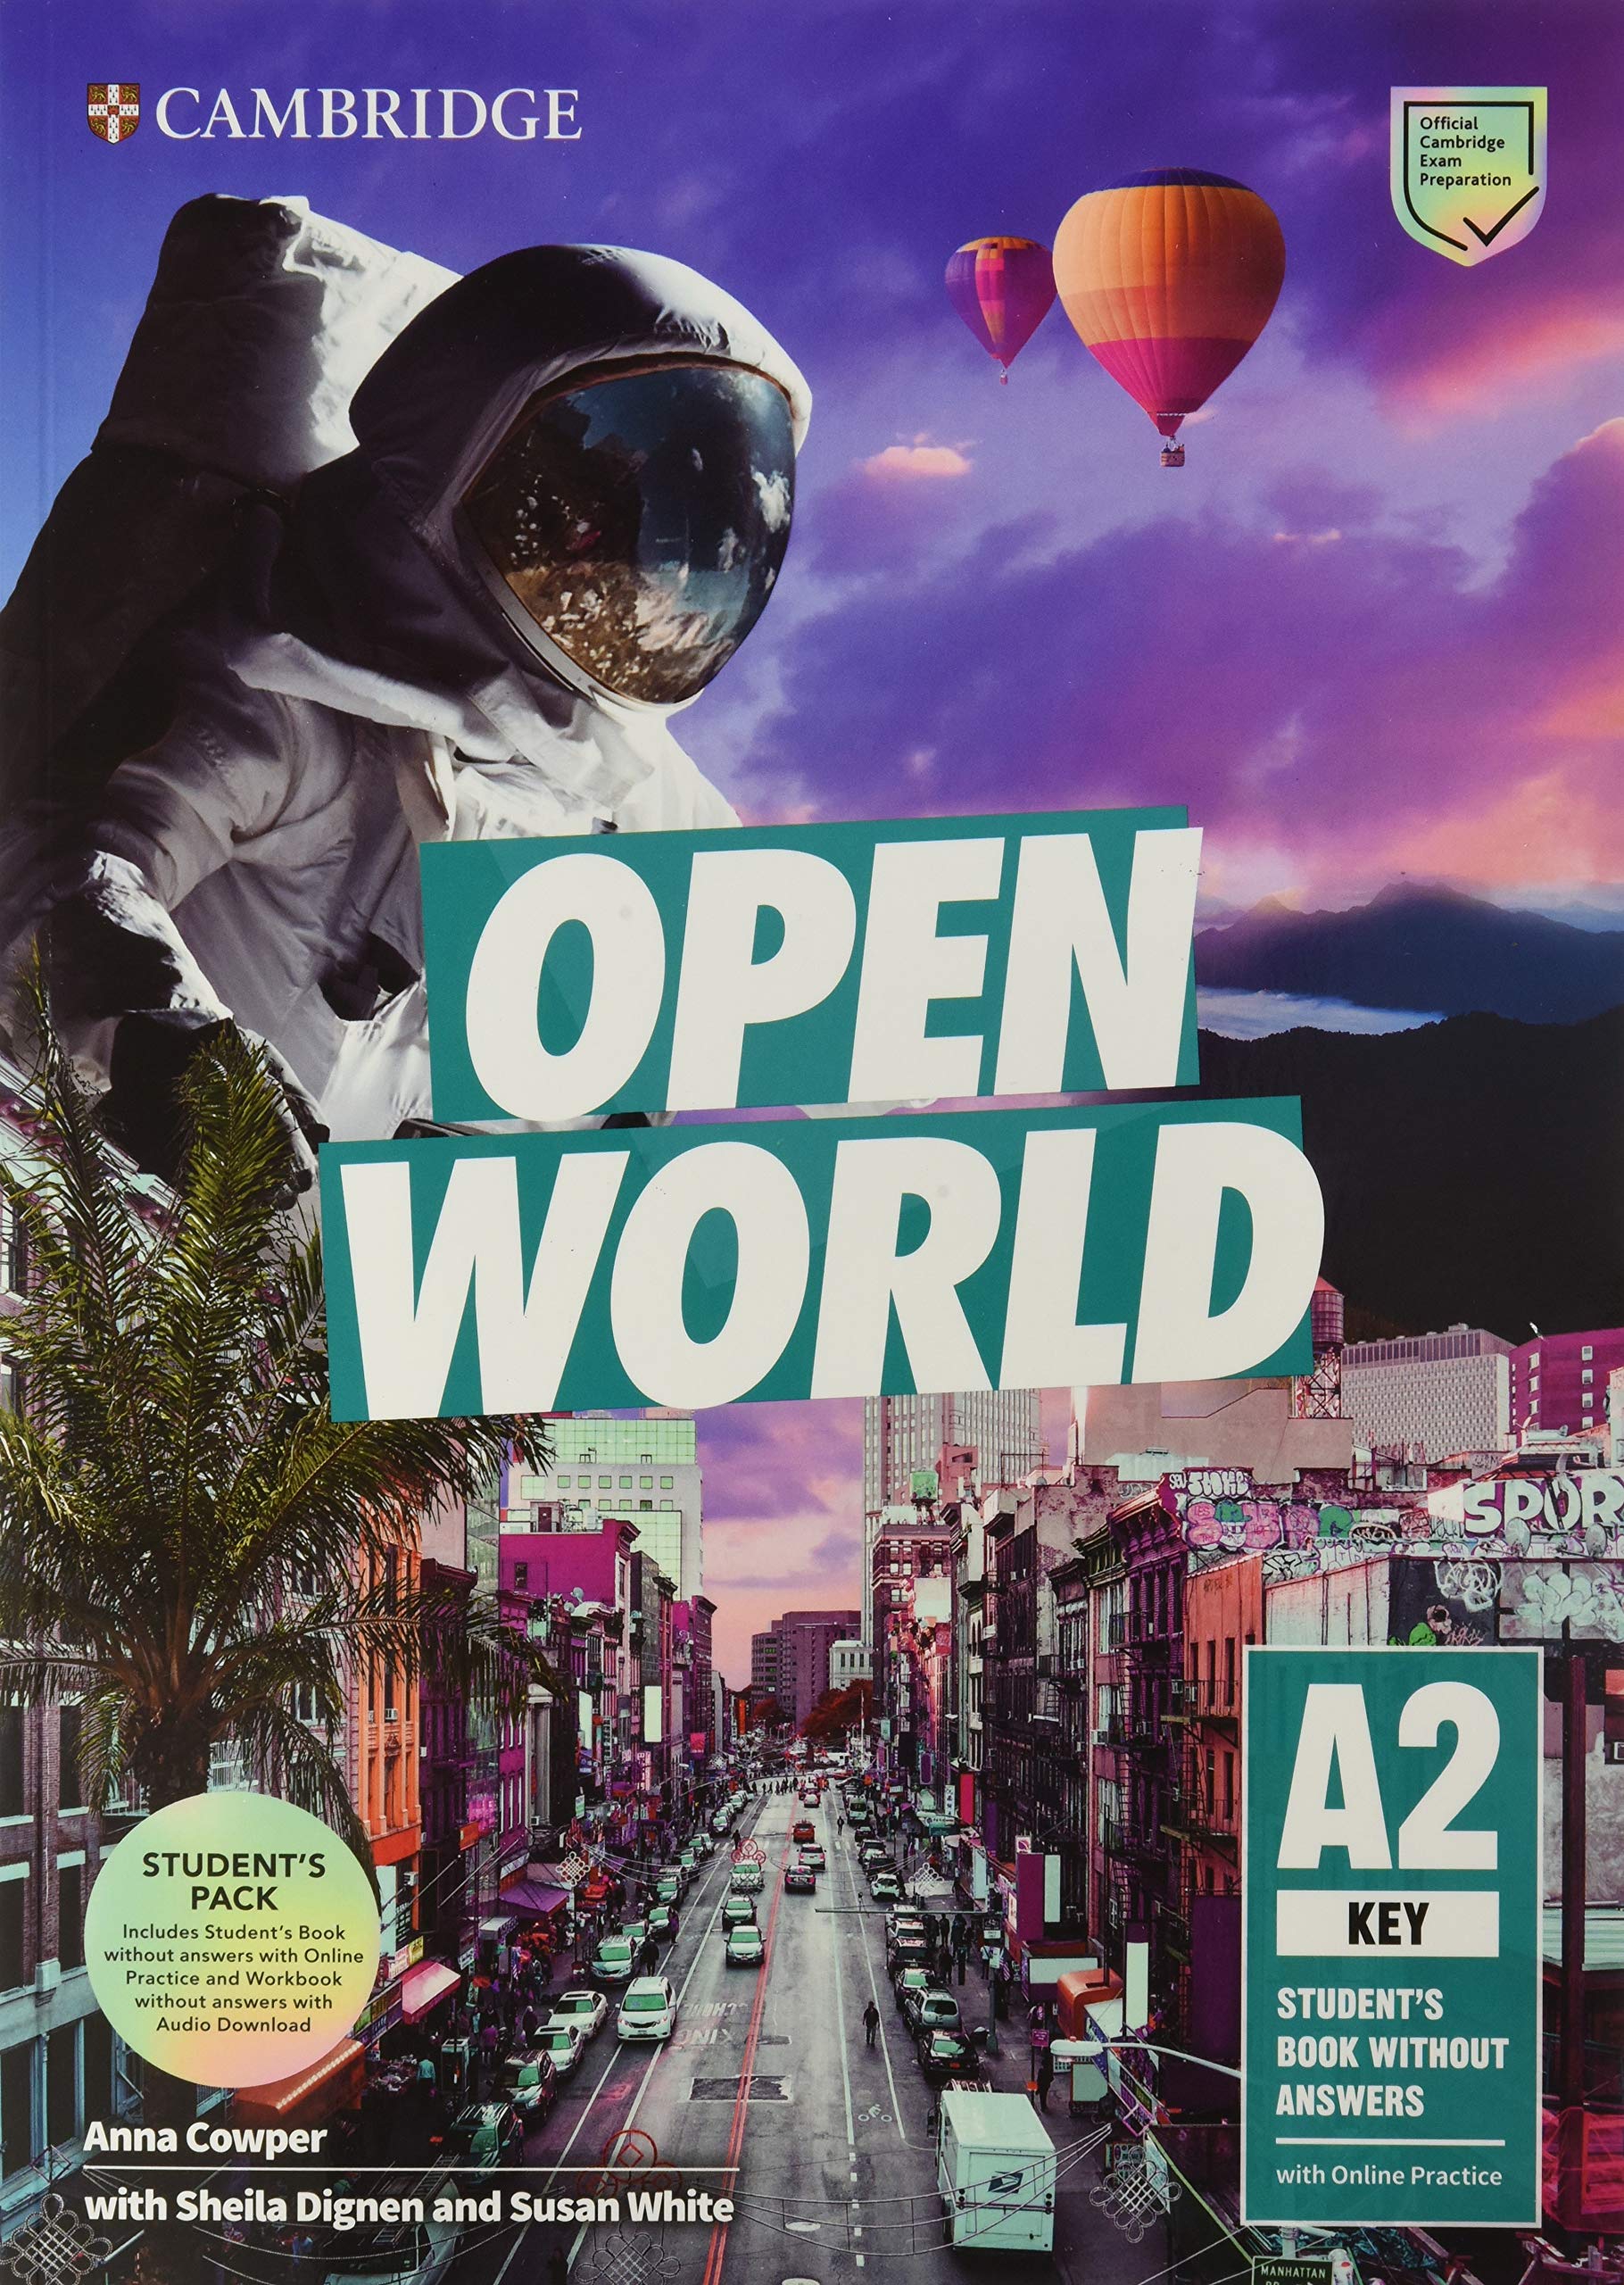 OPEN WORLD KEY Student's Book Pack (Student's Book without Answers with Online Practice and Workbook without Answers with Audio Download)